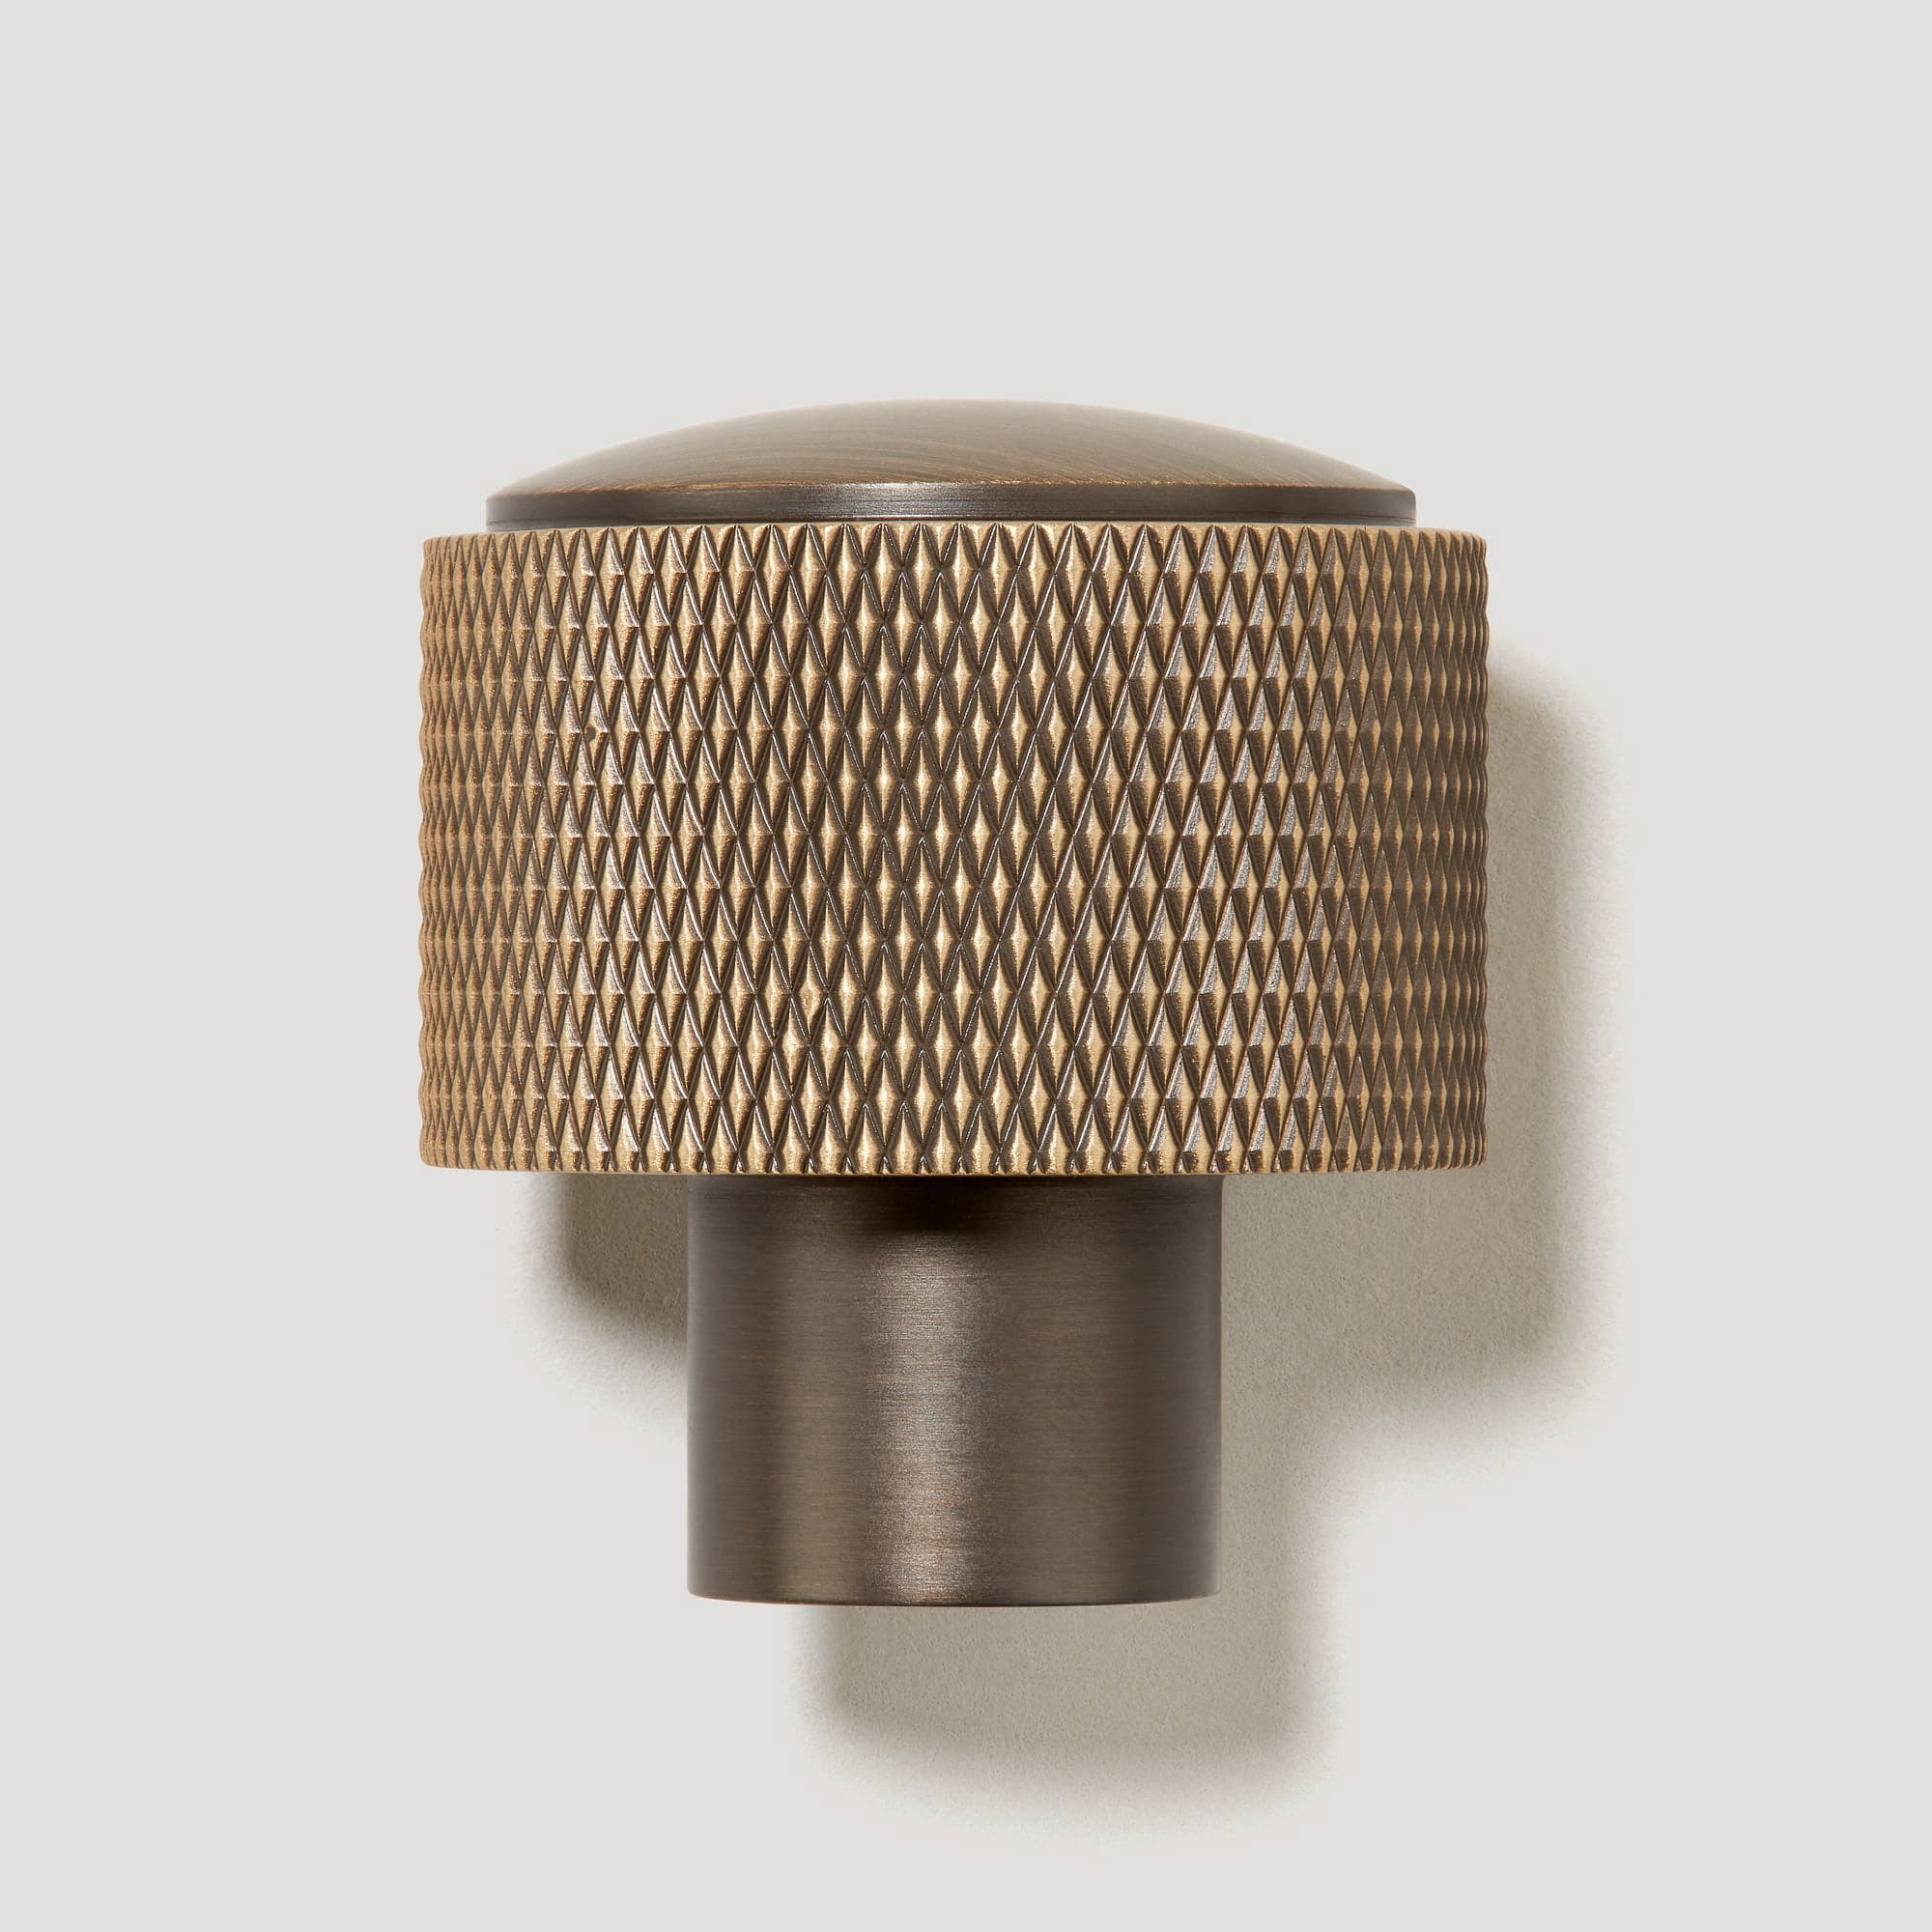 Plank Hardware HUMBOLDT Knurled Button Wall Hook - Antique Brass